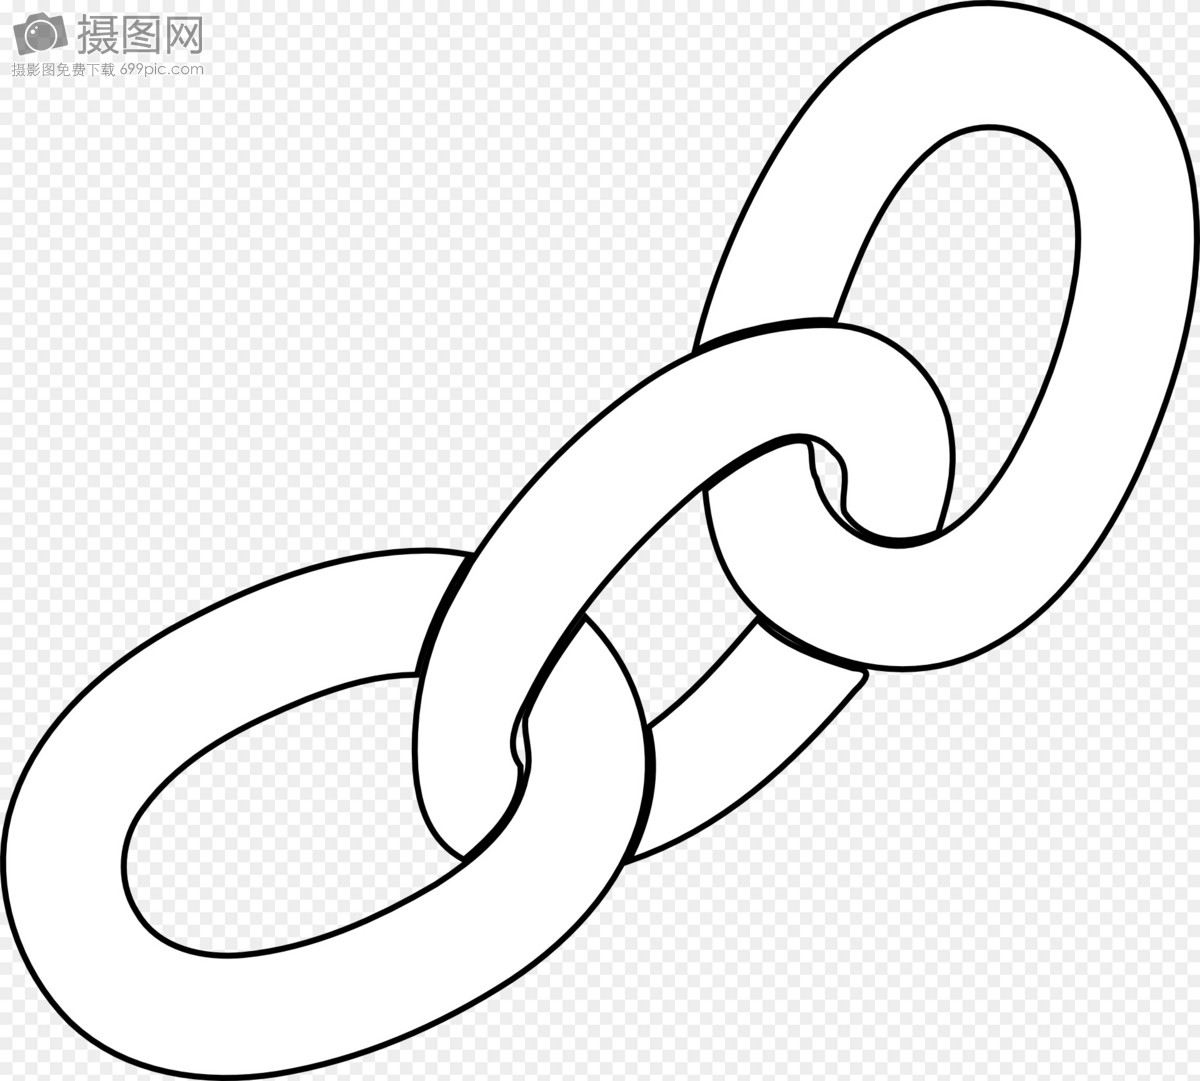 Chain drawing graphics image_picture free download